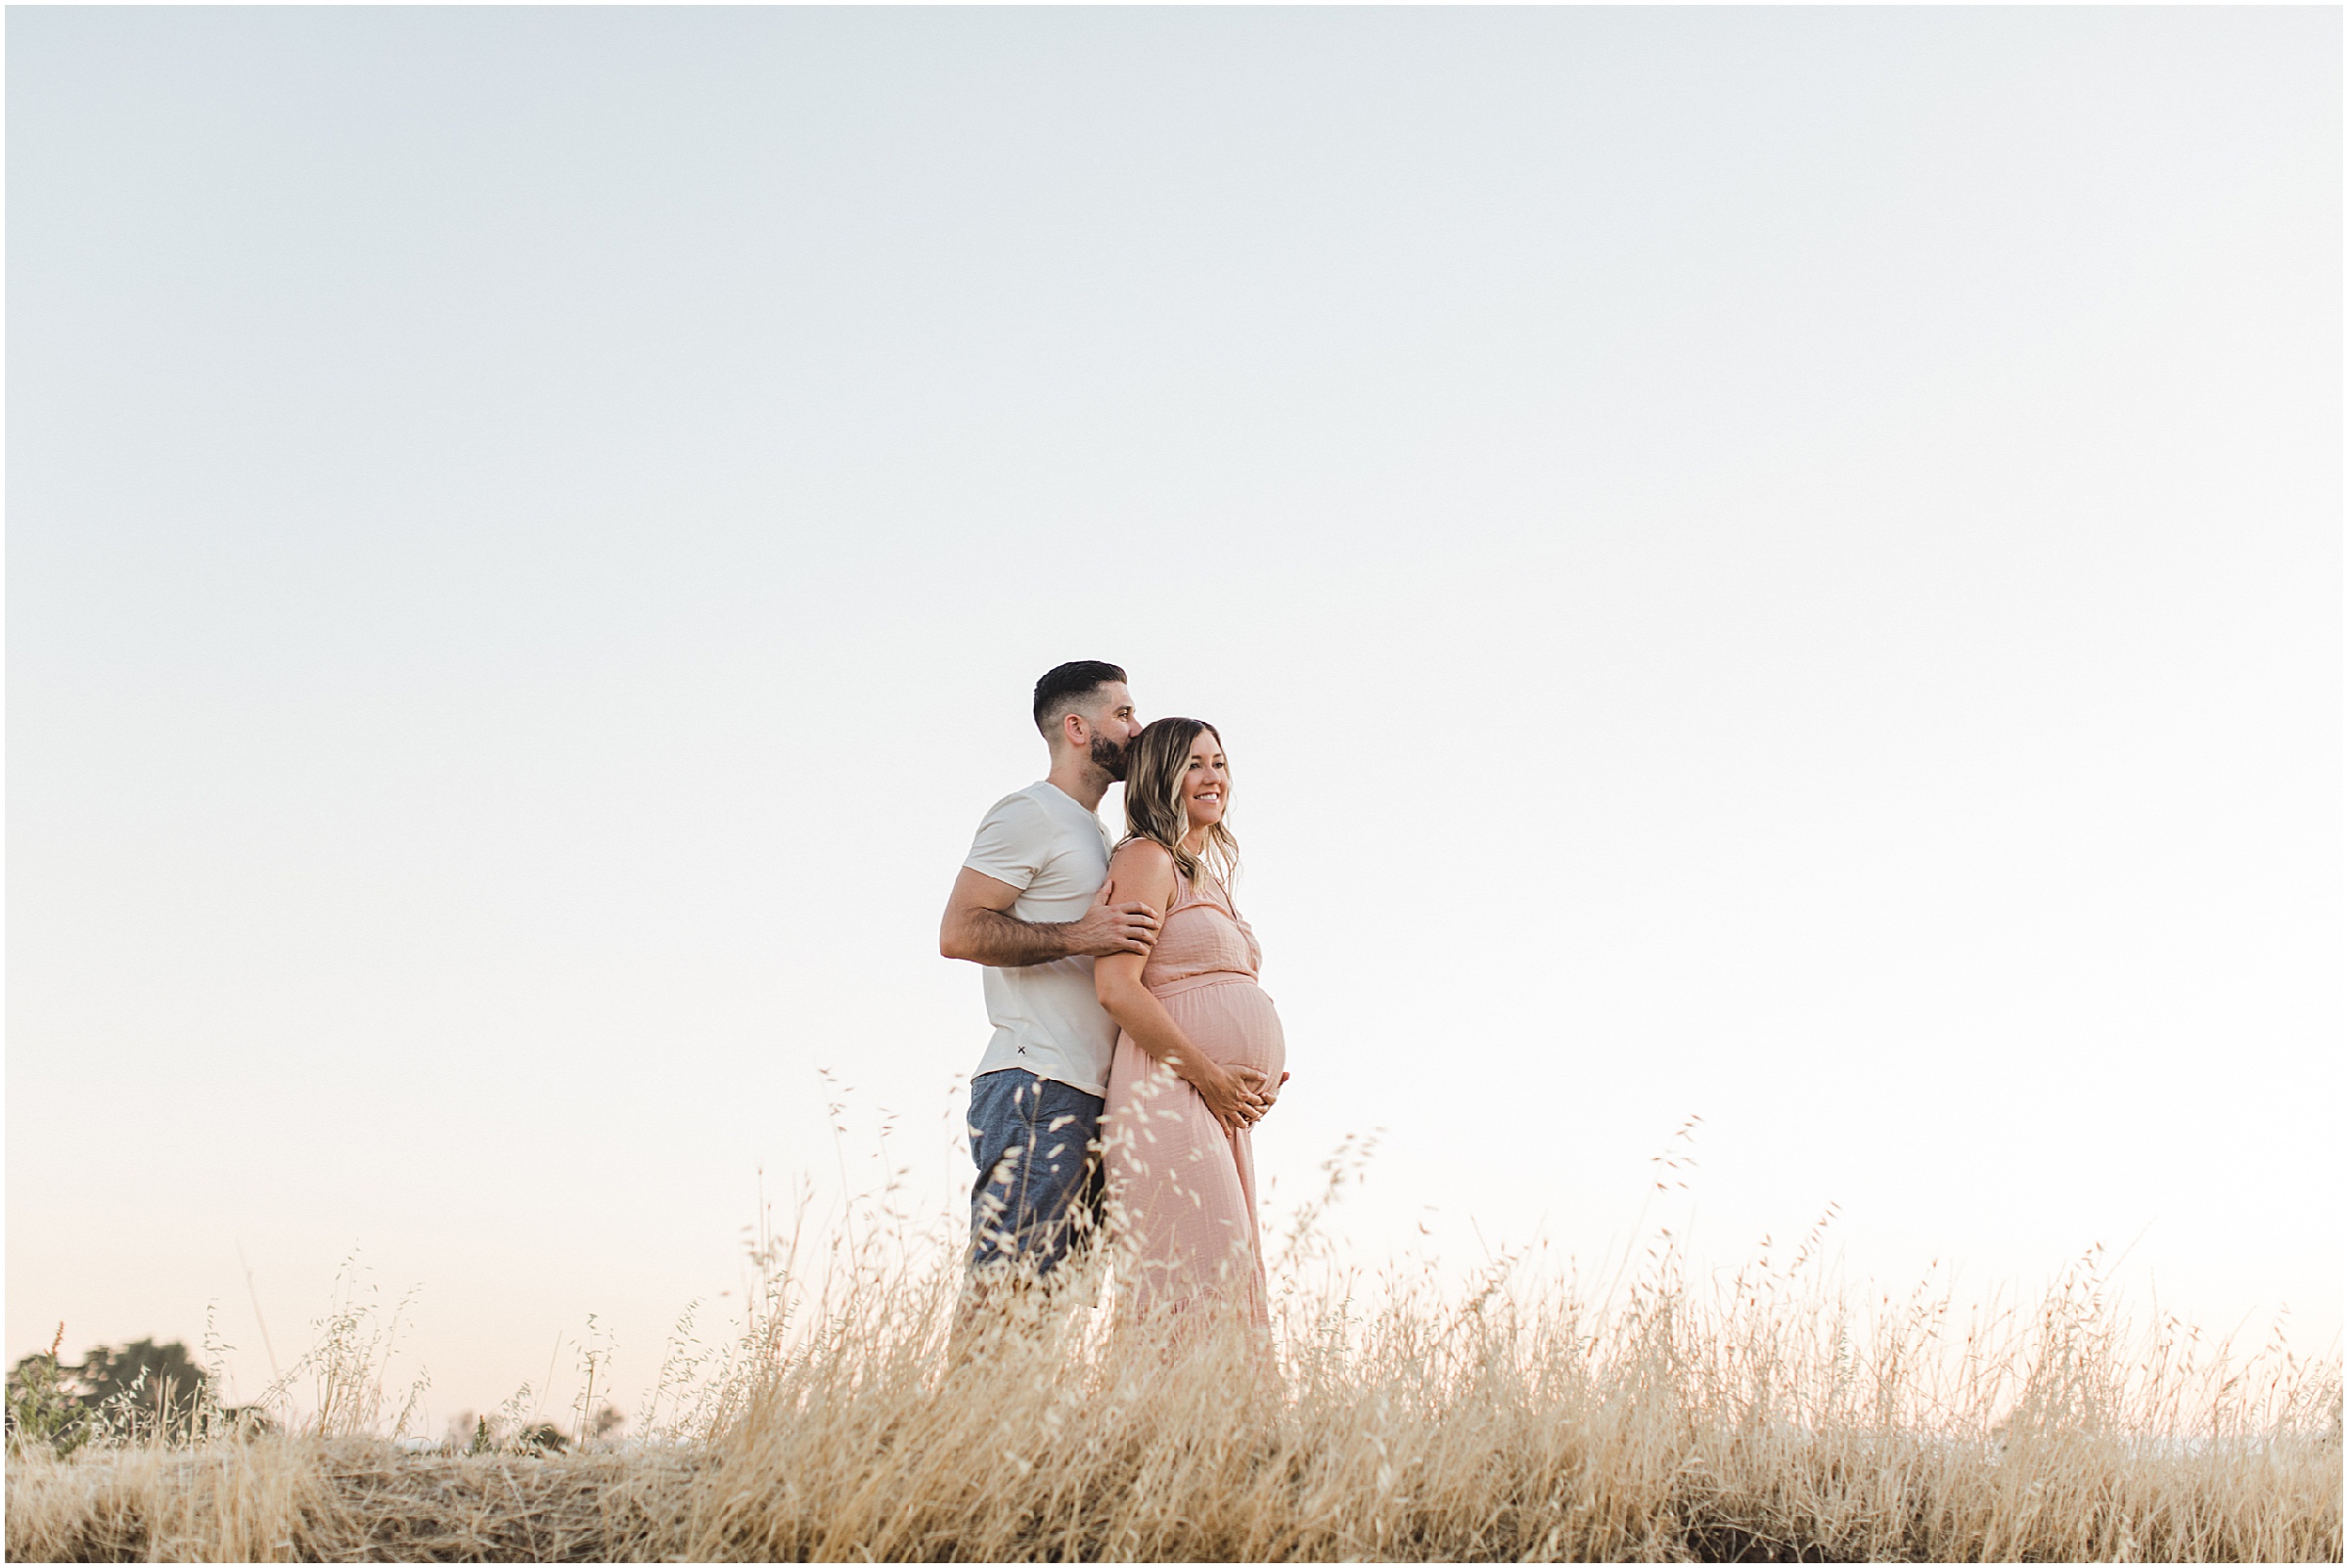 Romantic maternity shoot in the rolling grasslands of Upper Bidwell Park in Chico, CA by Ashley Carlascio Photography.